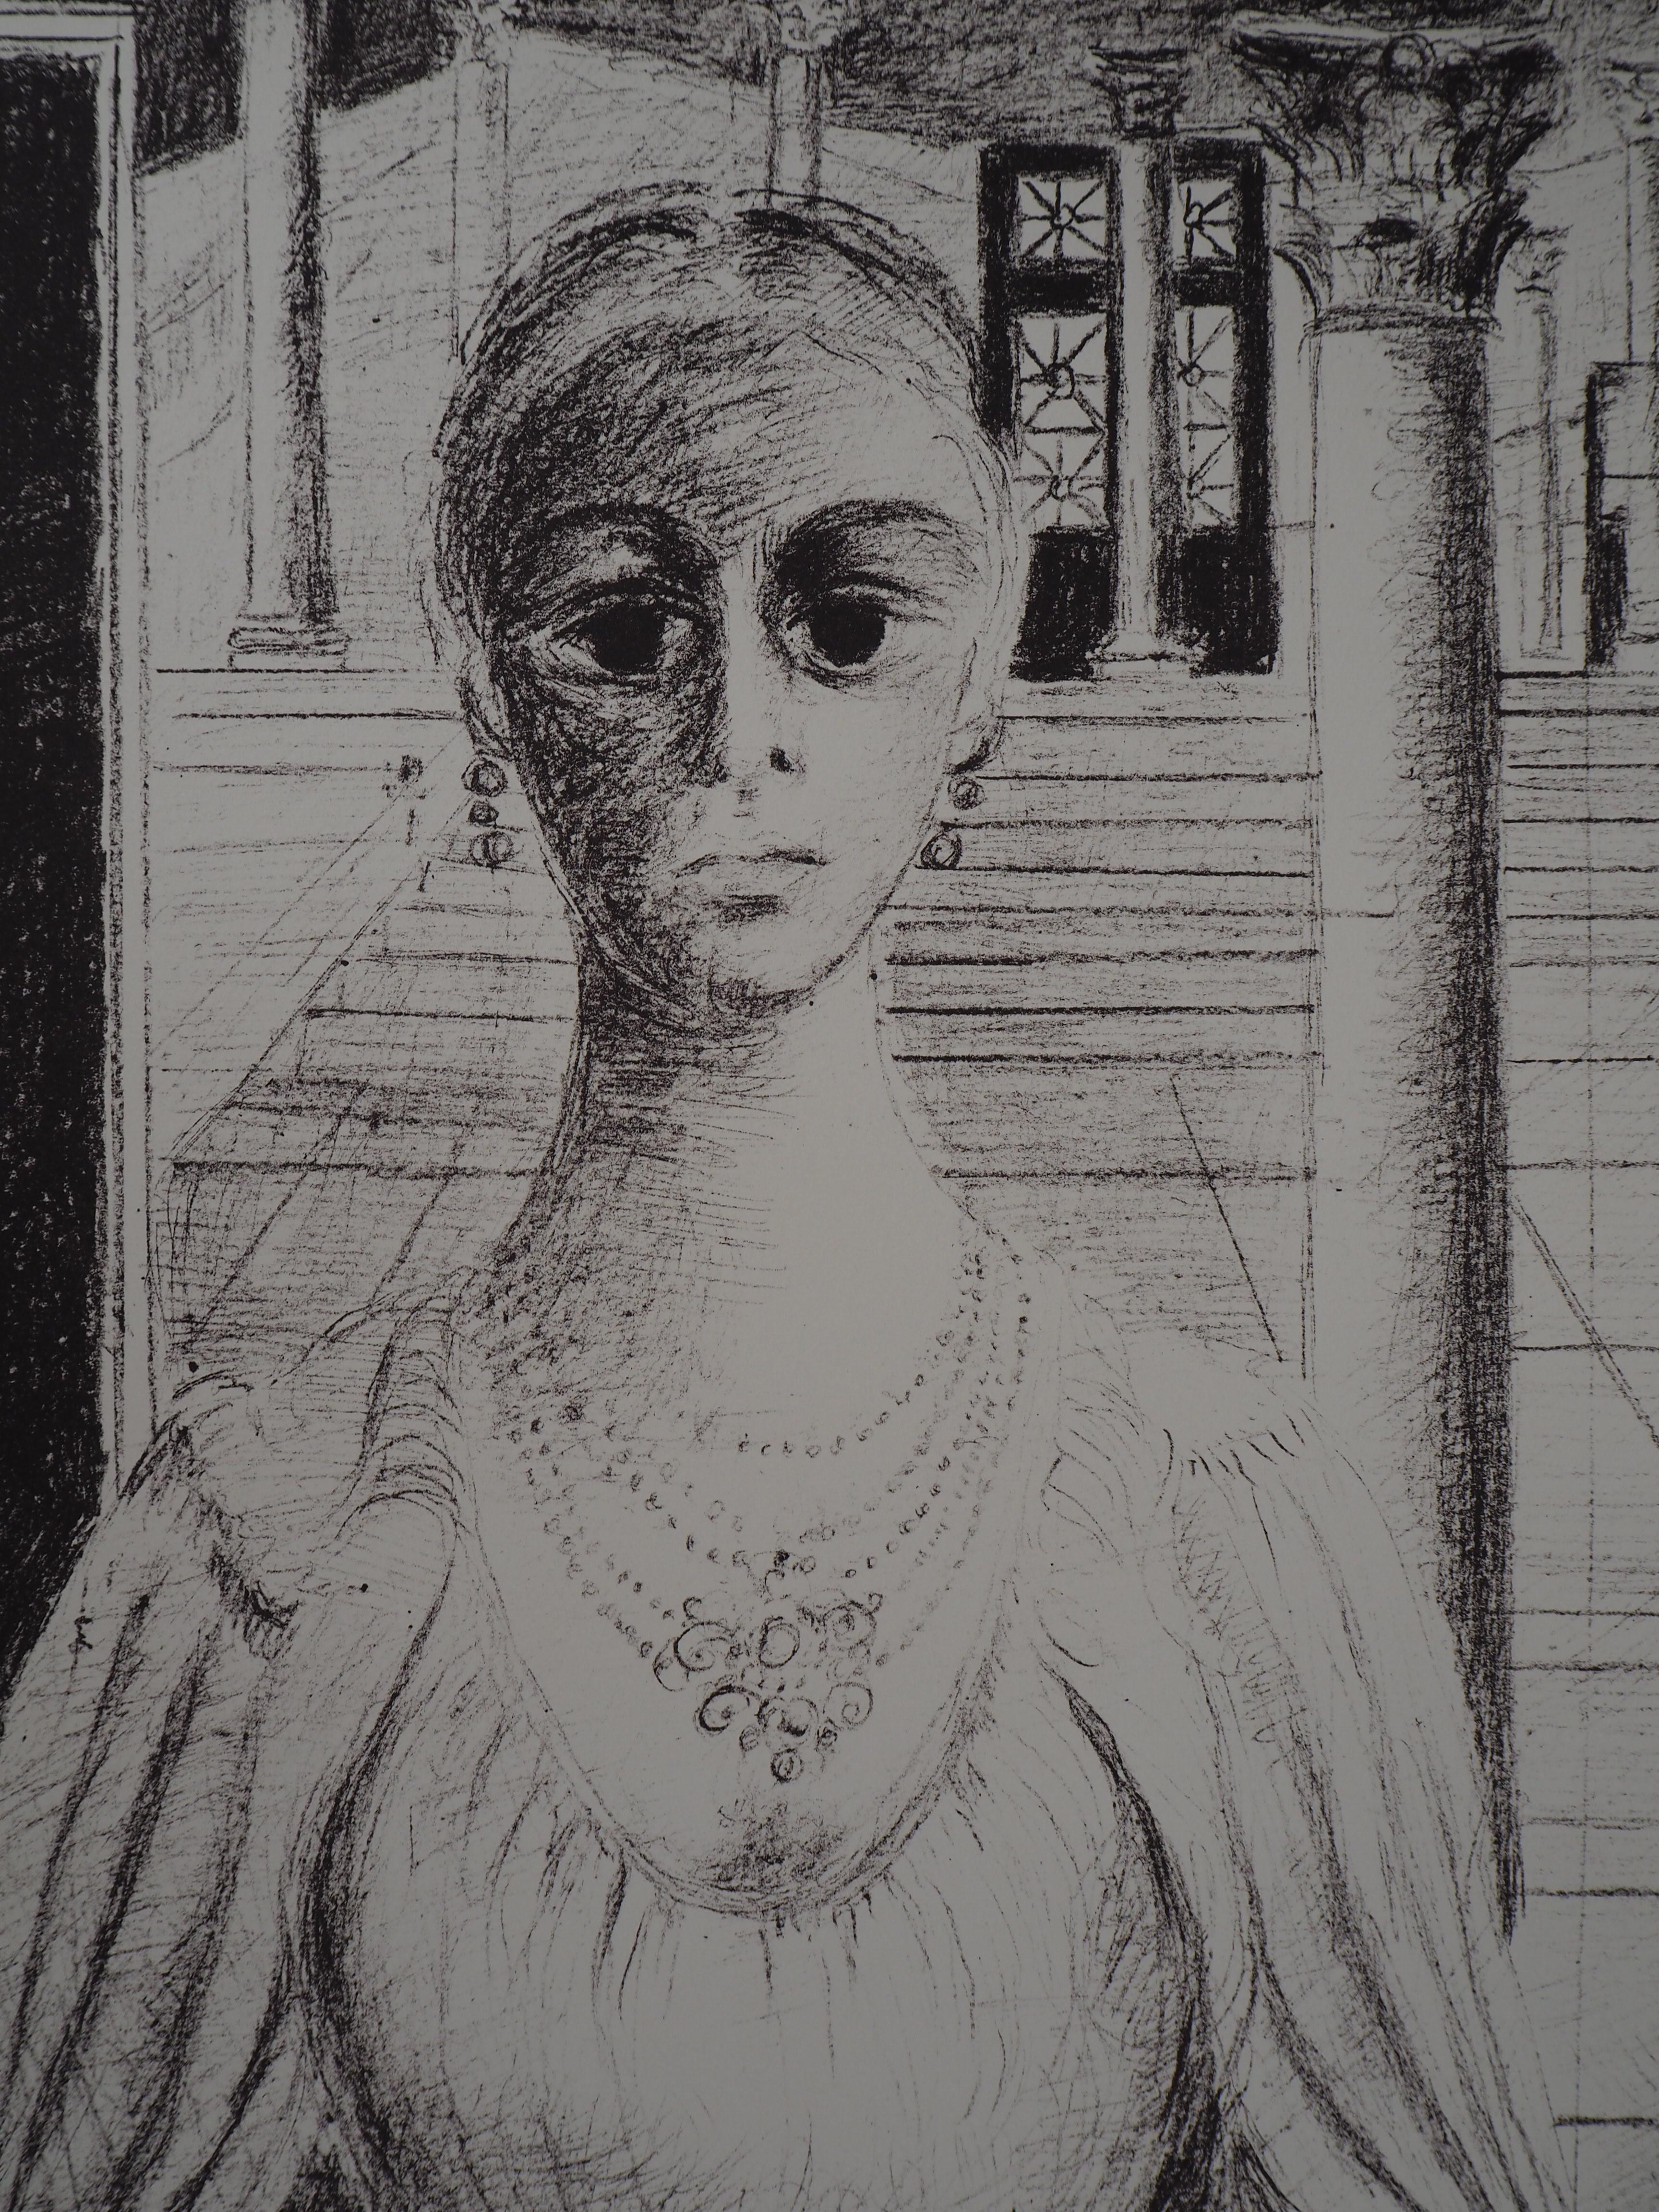 Paul DELVAUX
The Empress, 1974

Original stone lithograph
Signed in pencil
Justified HC (aside the edition of 50 numbered copies)
On Arches vellum 100 x 70.5 cm (c. 40 x 28 inch)

REFERENCES : Catalogue raisonne of prints of Delvaux, Jacob #71

Very